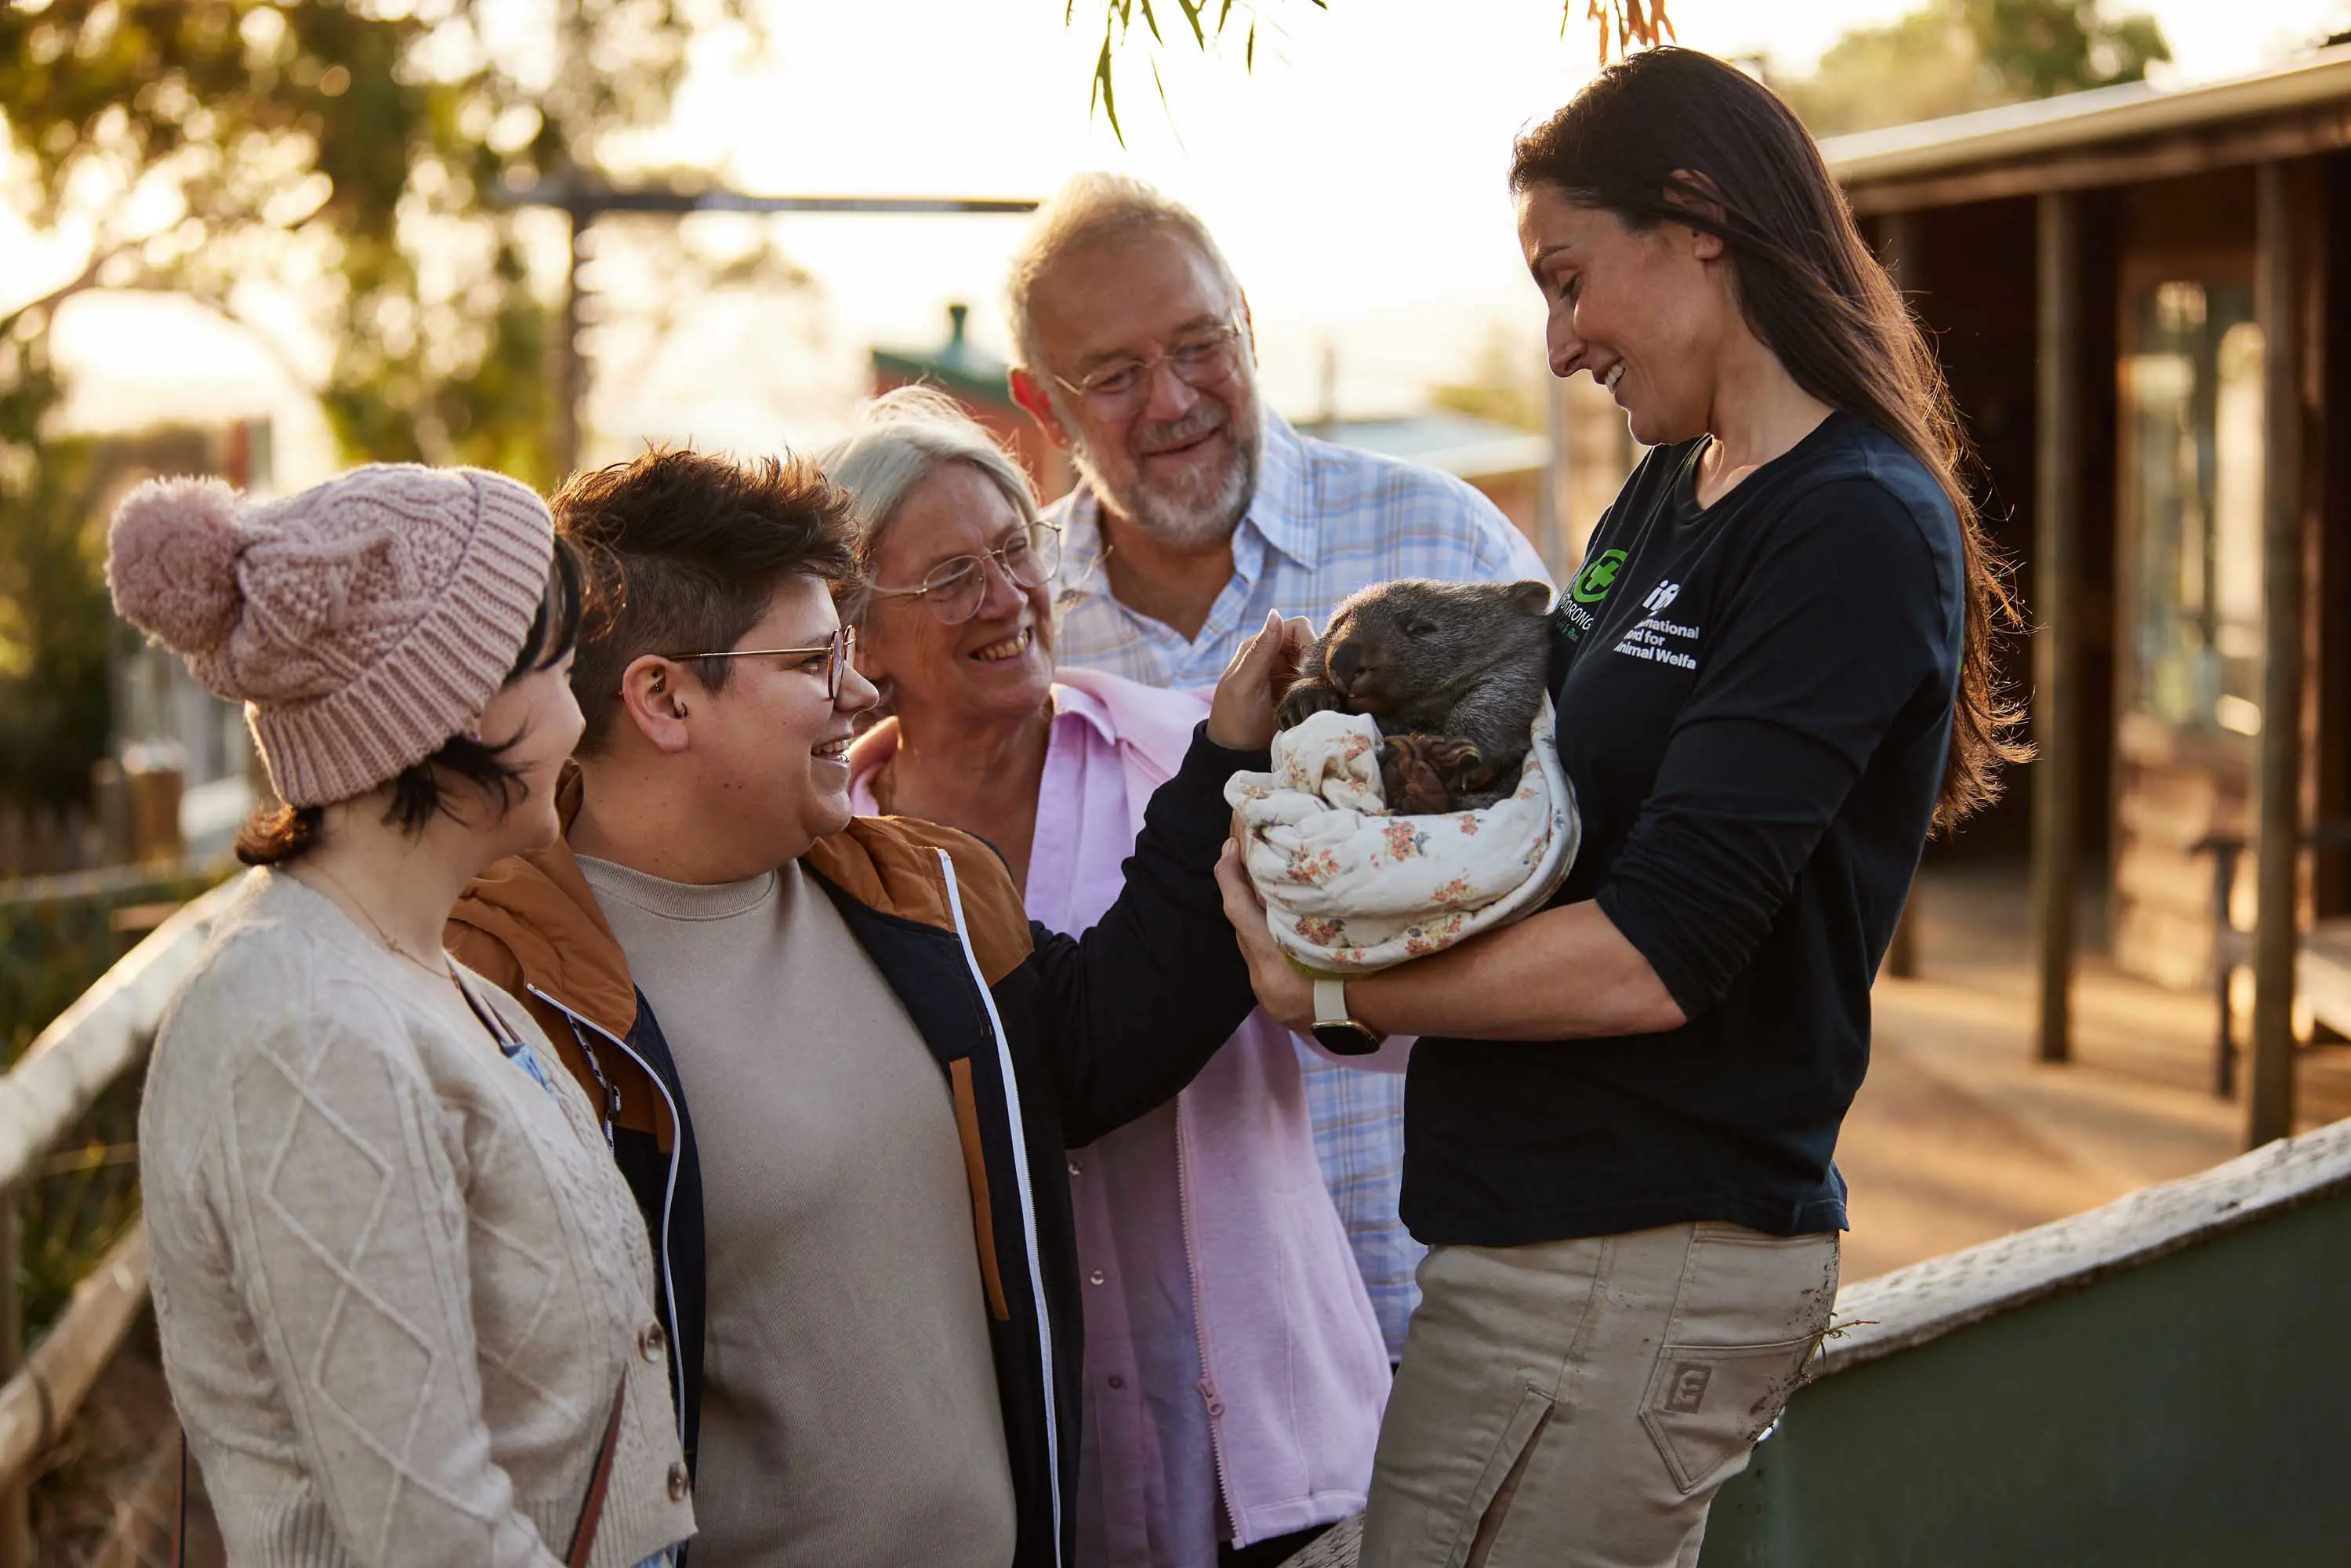 A wildlife handler cradles a baby wombat wrapped in a white blanket and shows a small group of smiling people.